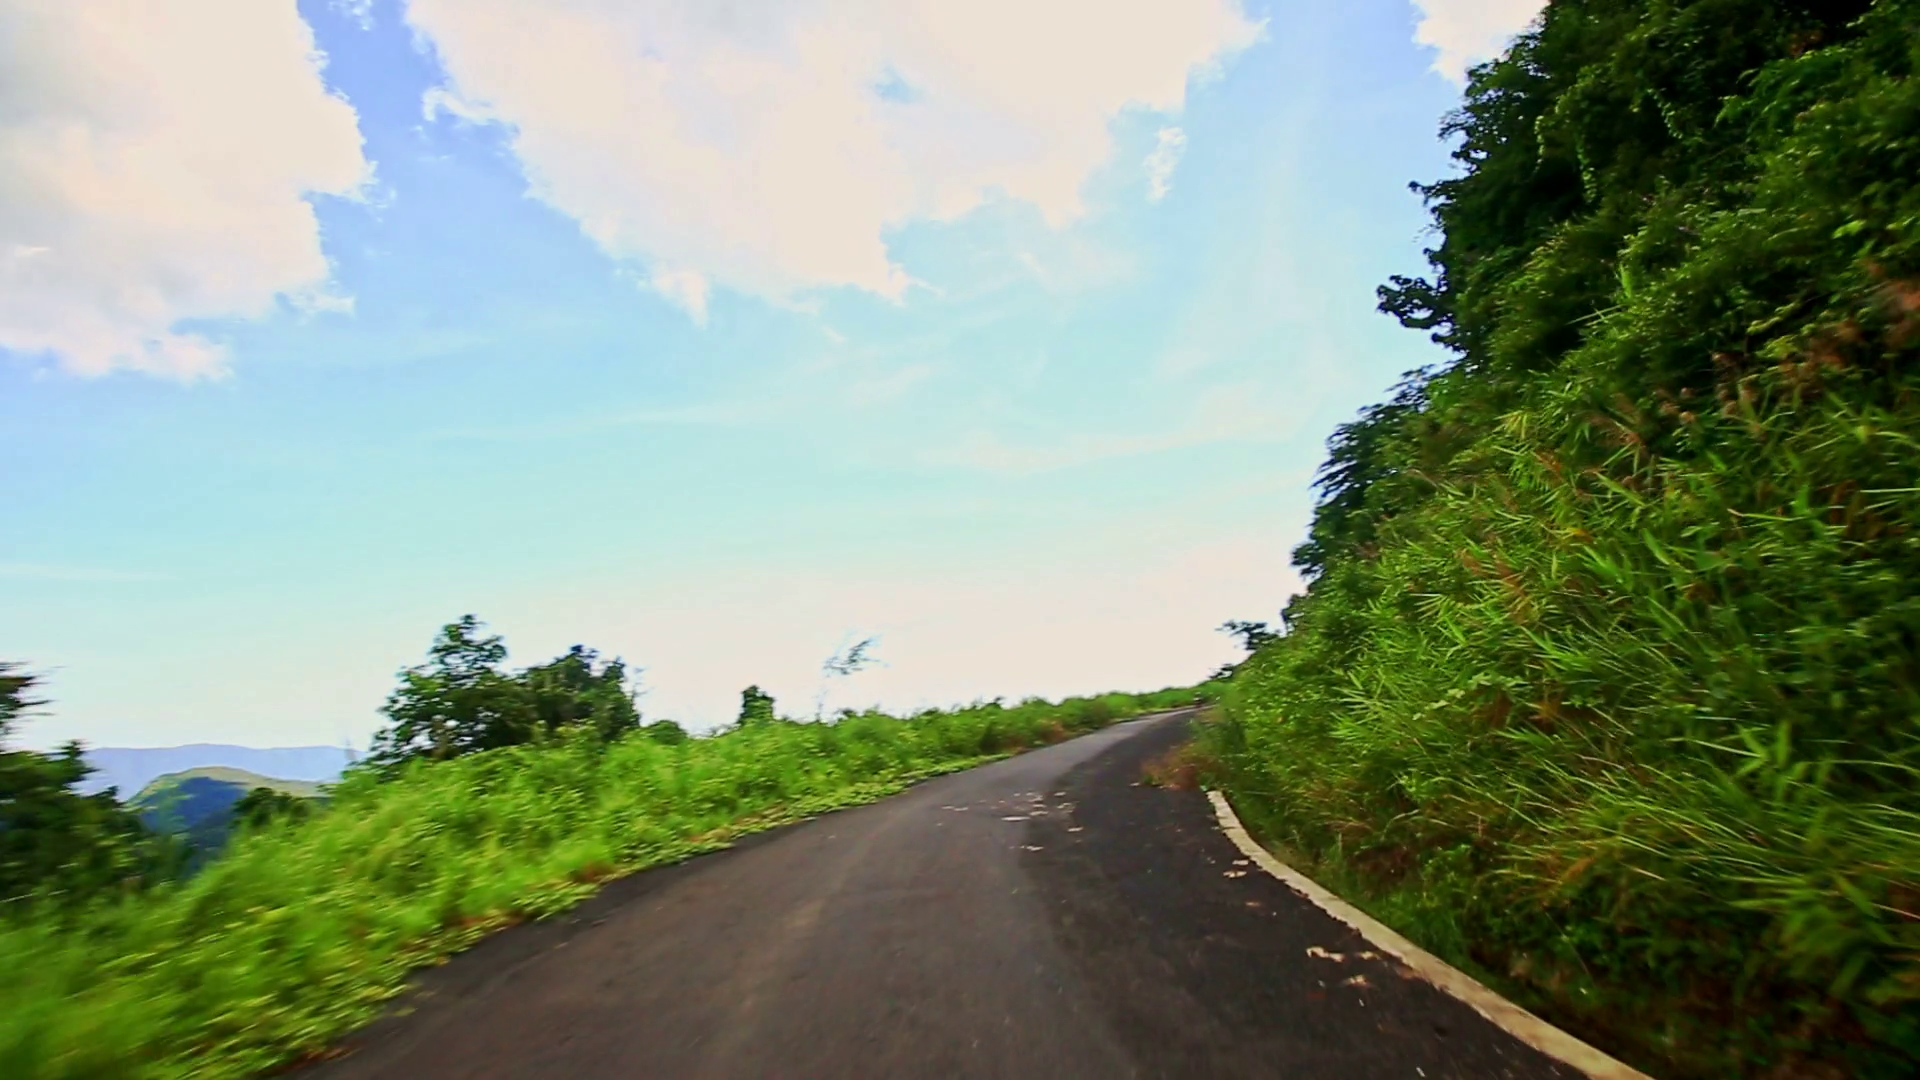 Motion along Country Curvy Road among Hilly Landscape under Sky ...